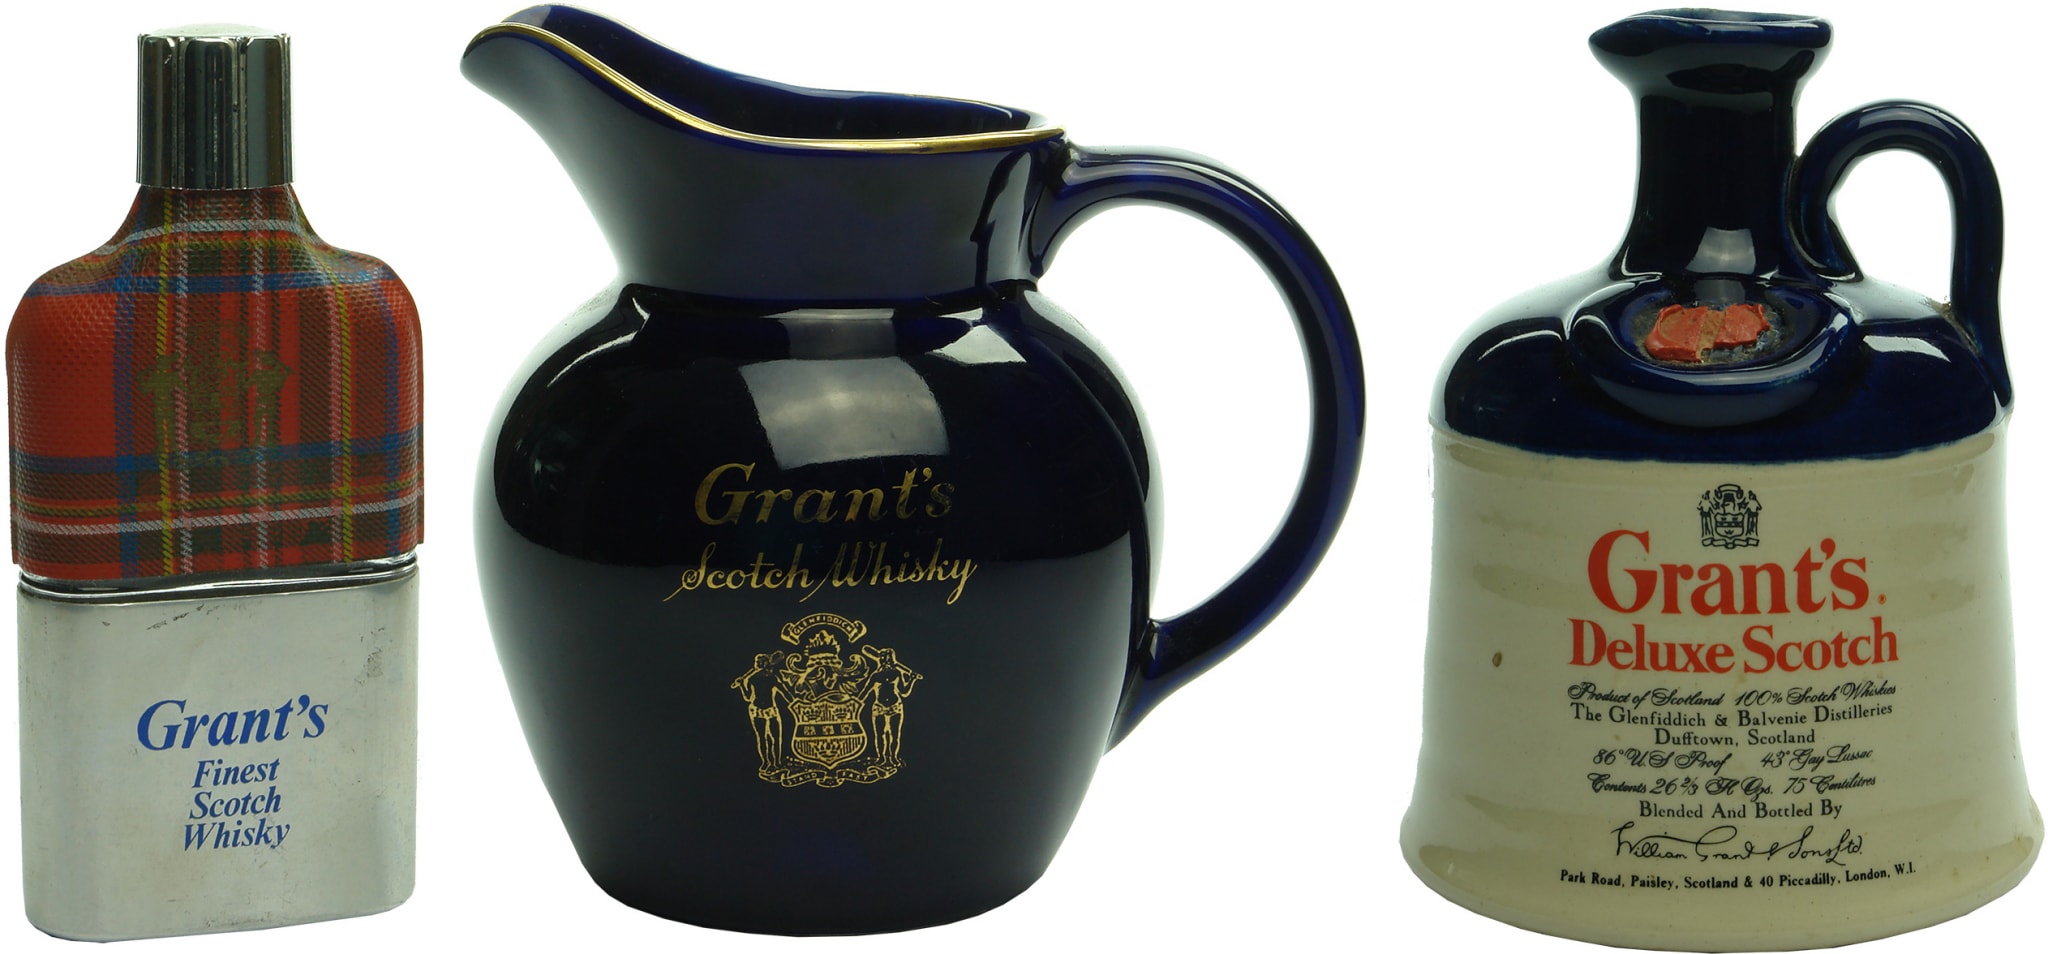 Grant's Finest Scotch Whisky Jugs Advertising